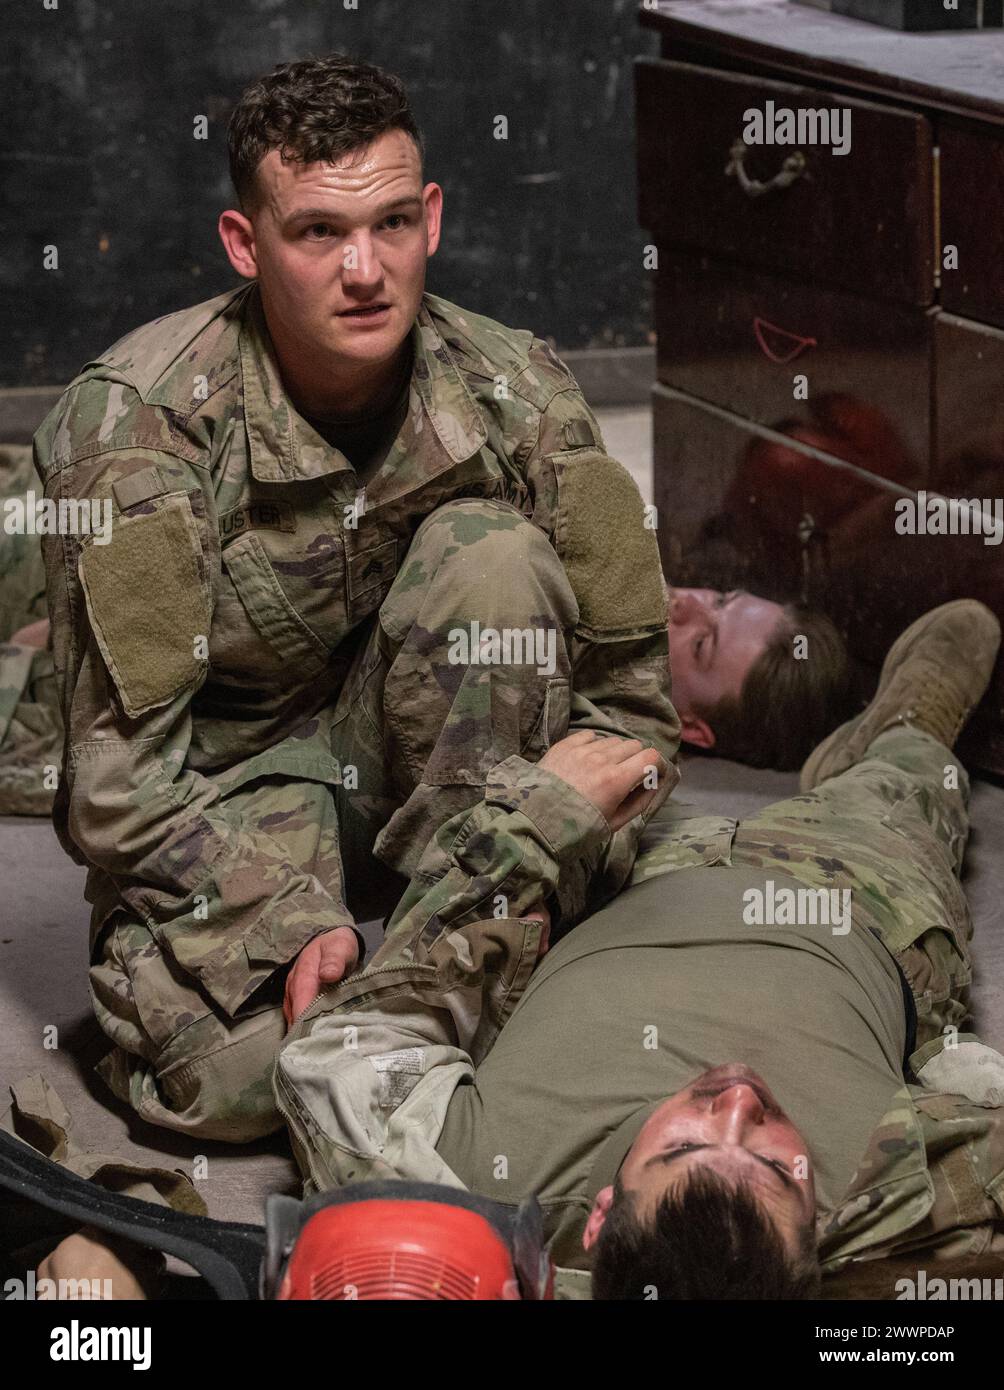 U.S. Army Sgt. Connor Lauster, assigned to C Company, 15th Brigade Support Battalion, 2nd Armored Brigade Combat Team, 1st Cavalry Division, conducts tactical field care at the Medical Simulation Training Center, on Fort Cavazos, Texas, February 22, 2024. At this stage, Lauster is checking his casualty for hemorrhage, airway obstruction, and circulatory issues.  Army Stock Photo